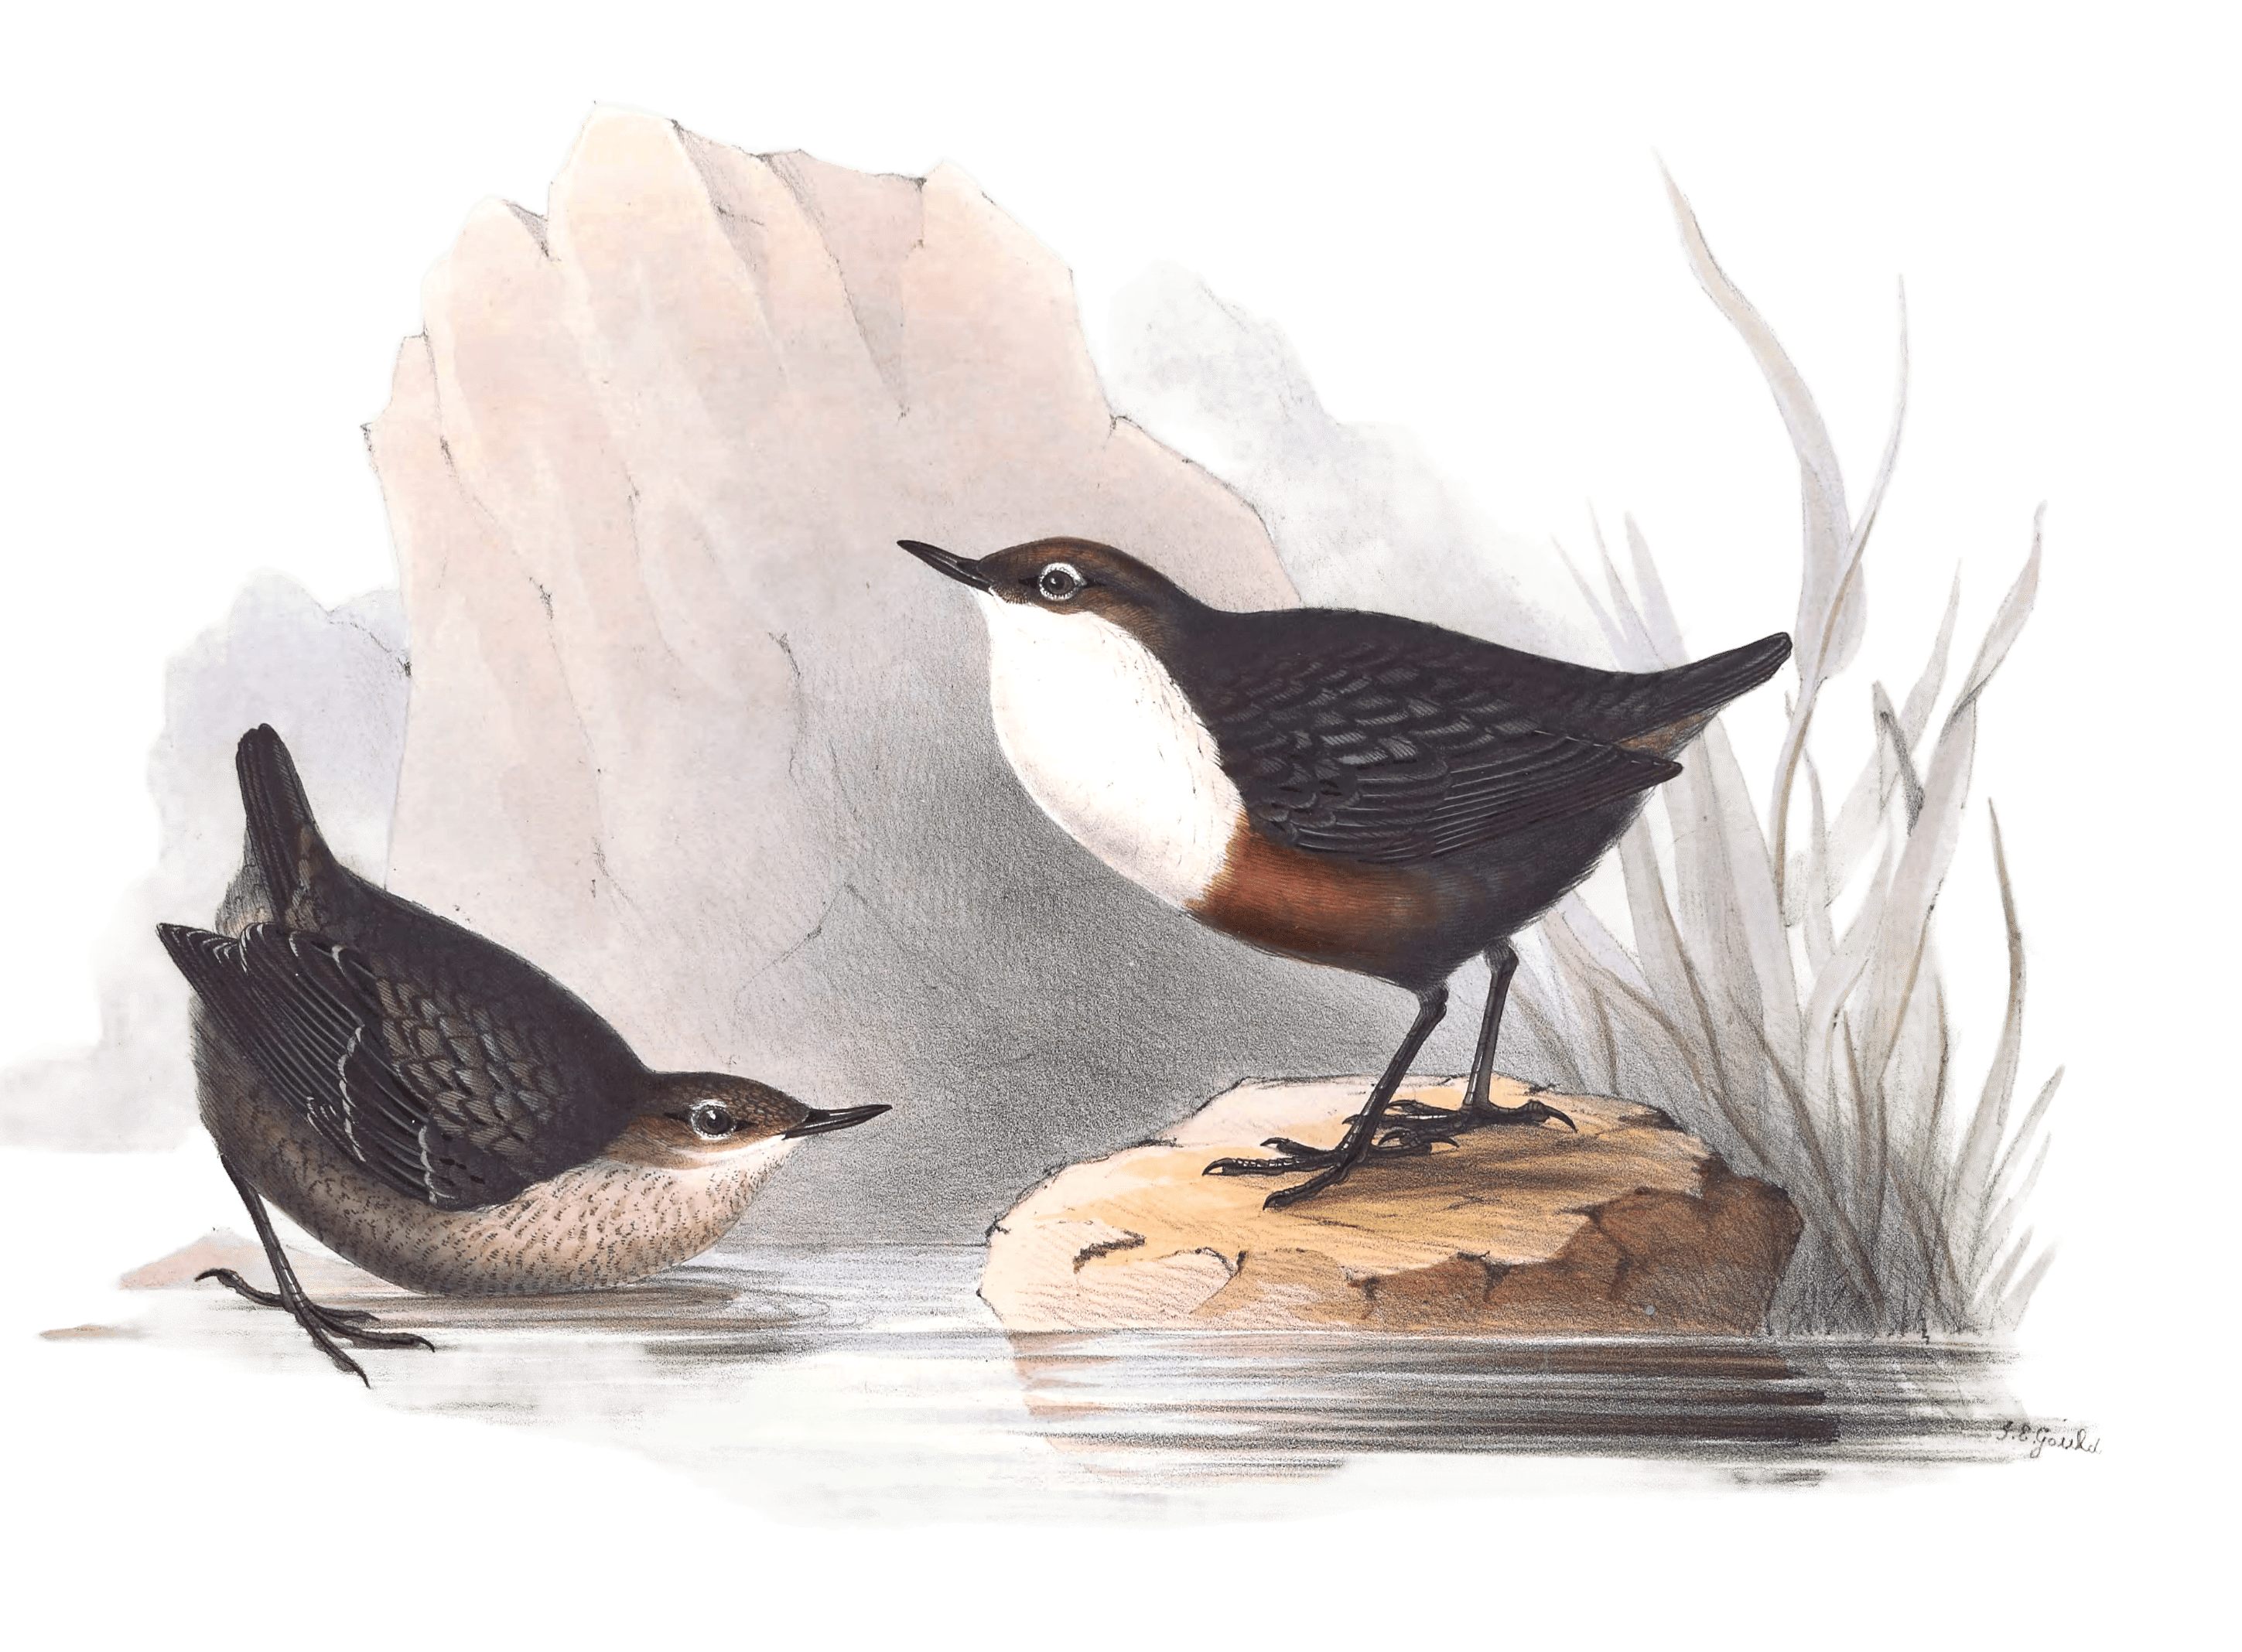 water ouzel or dipper